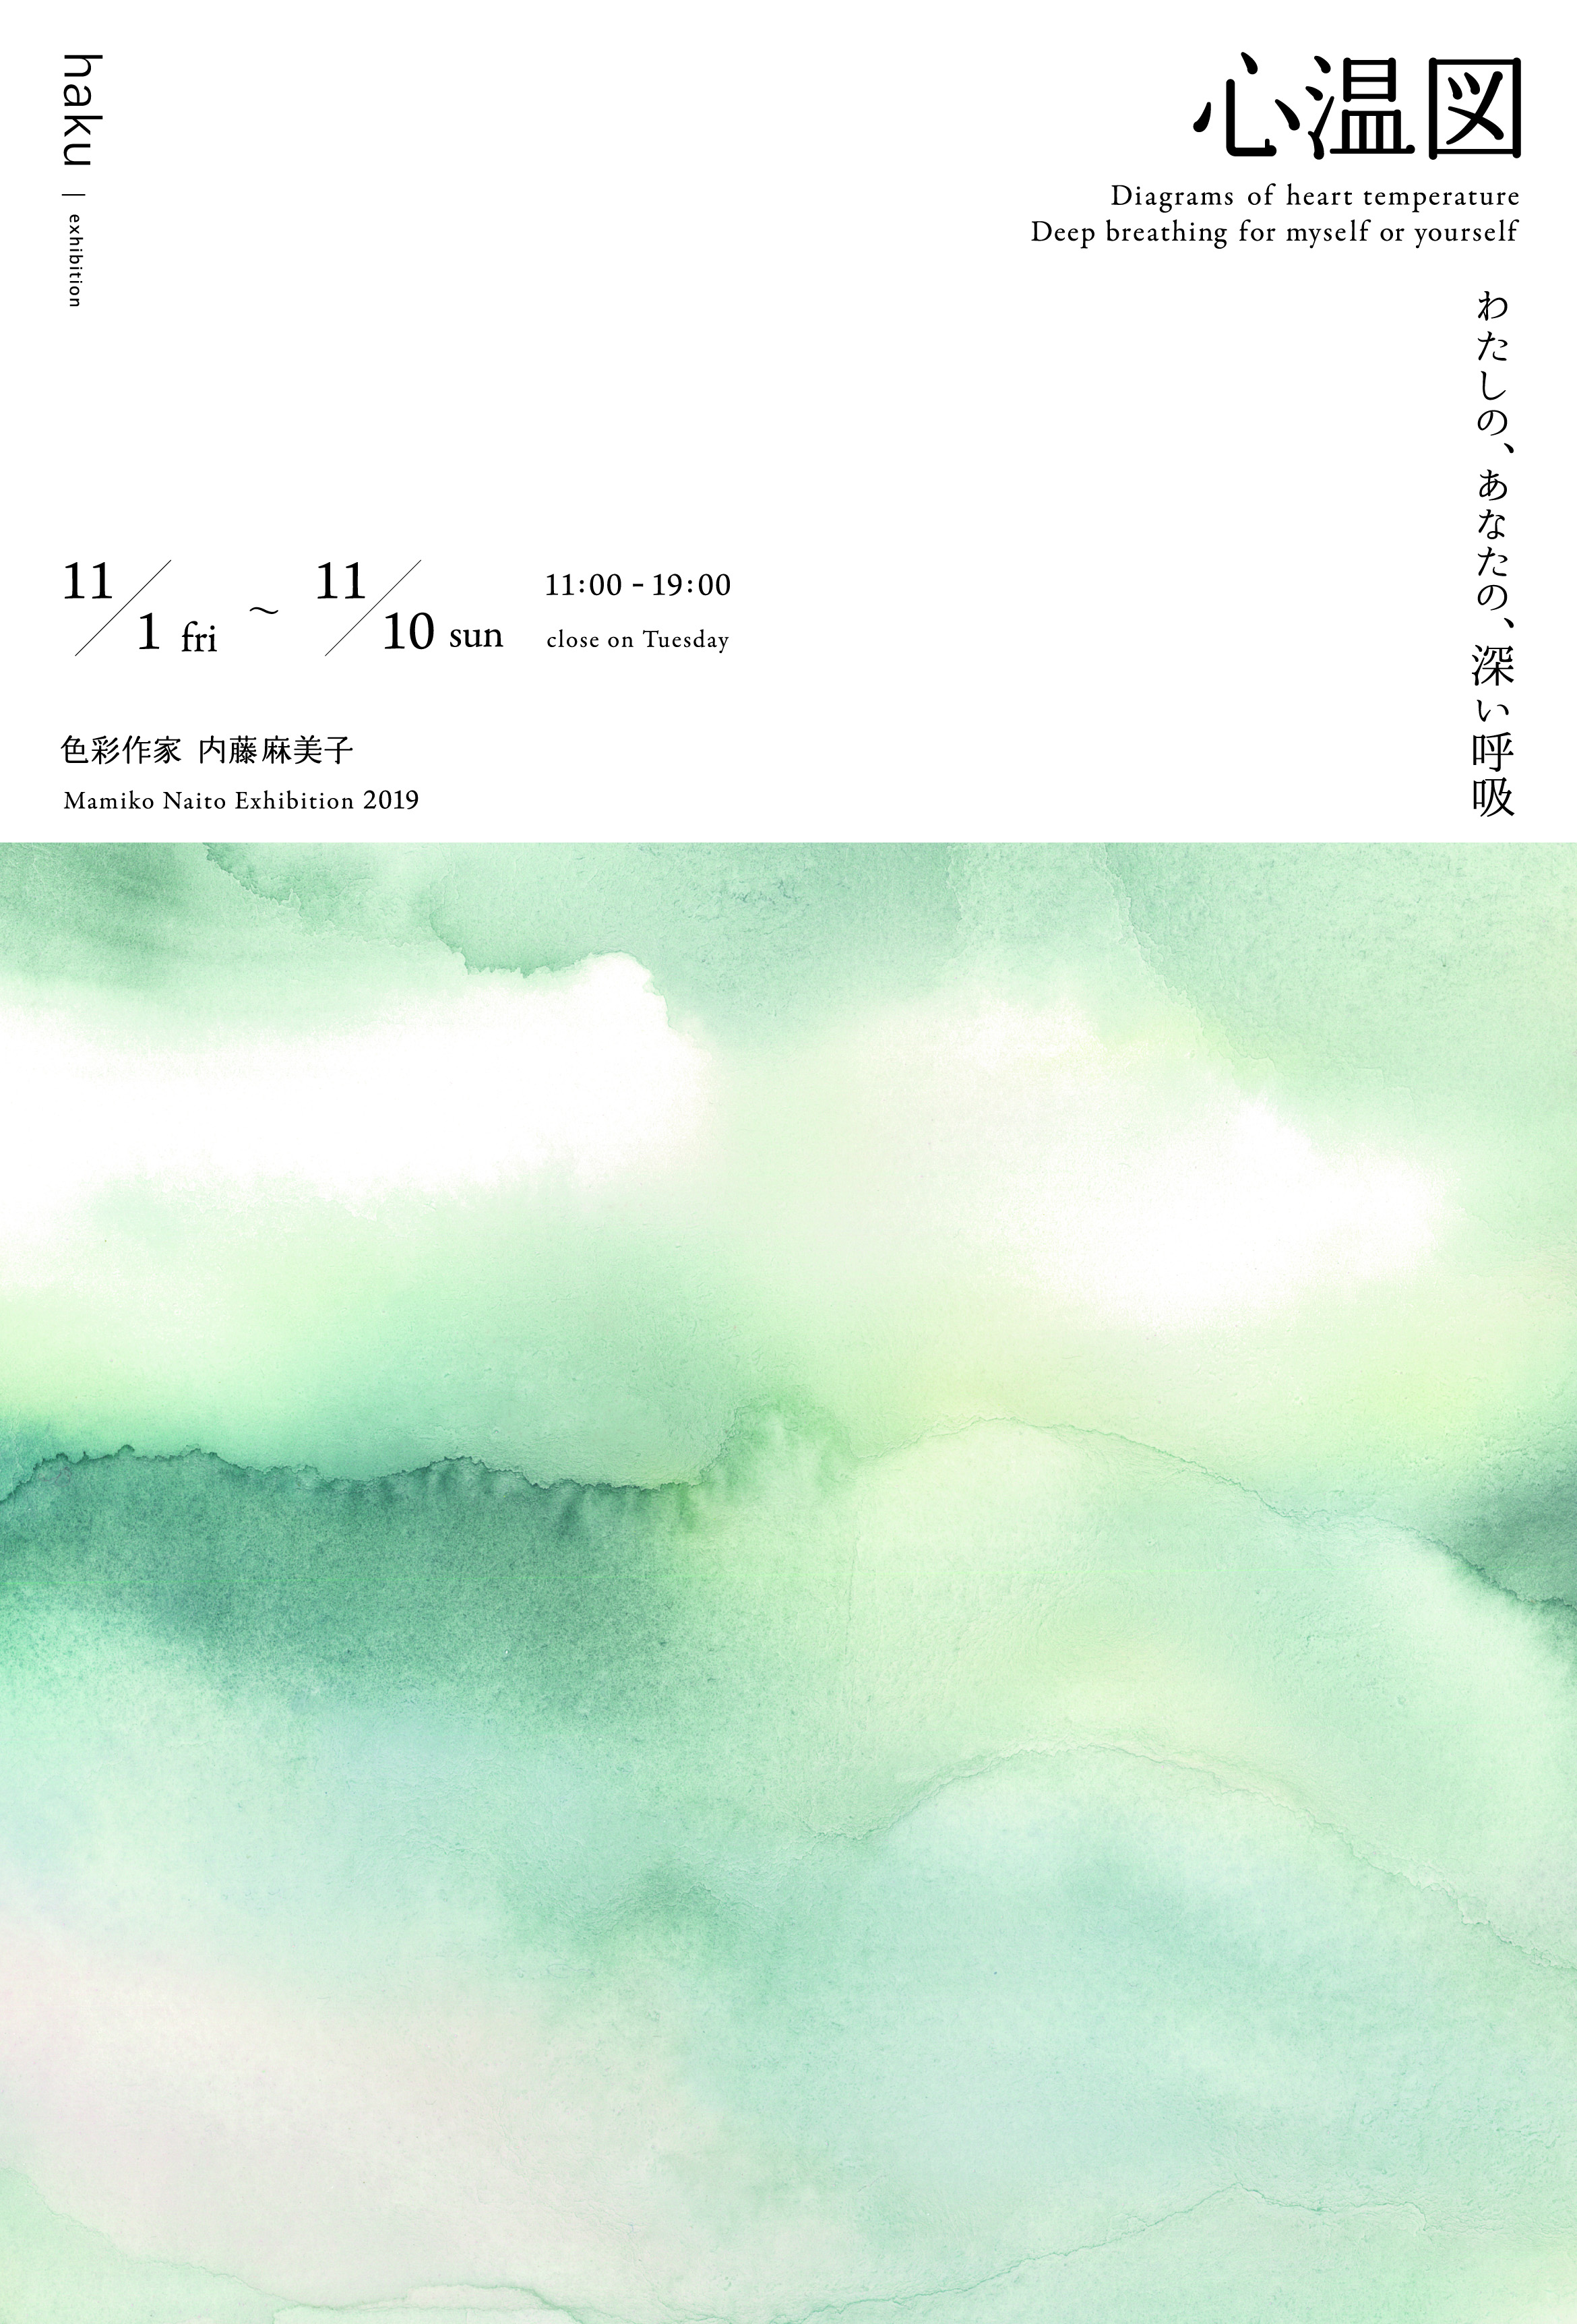 About the Solo Exhibition［at haku kyoto 2019］